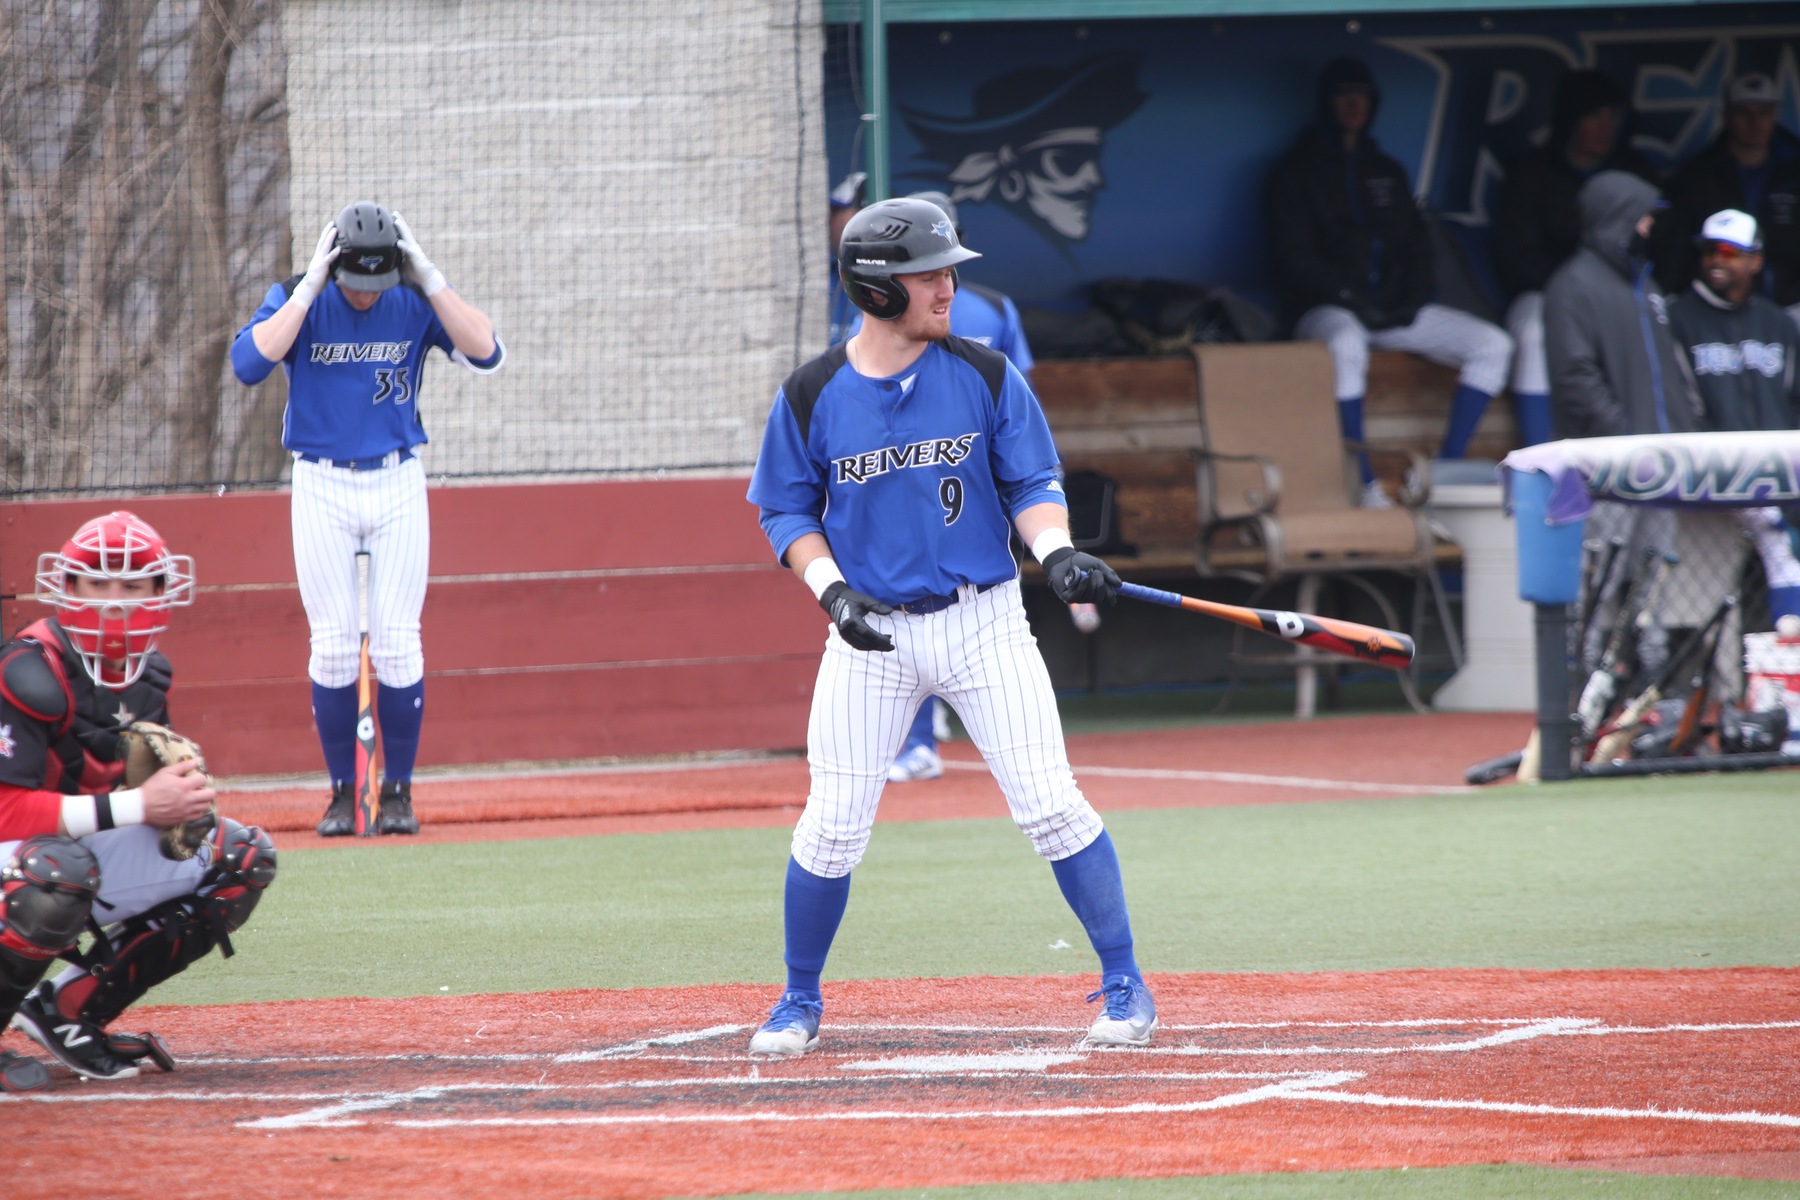 Reivers Pound Cloud County 13-6 in Mid-Week Action